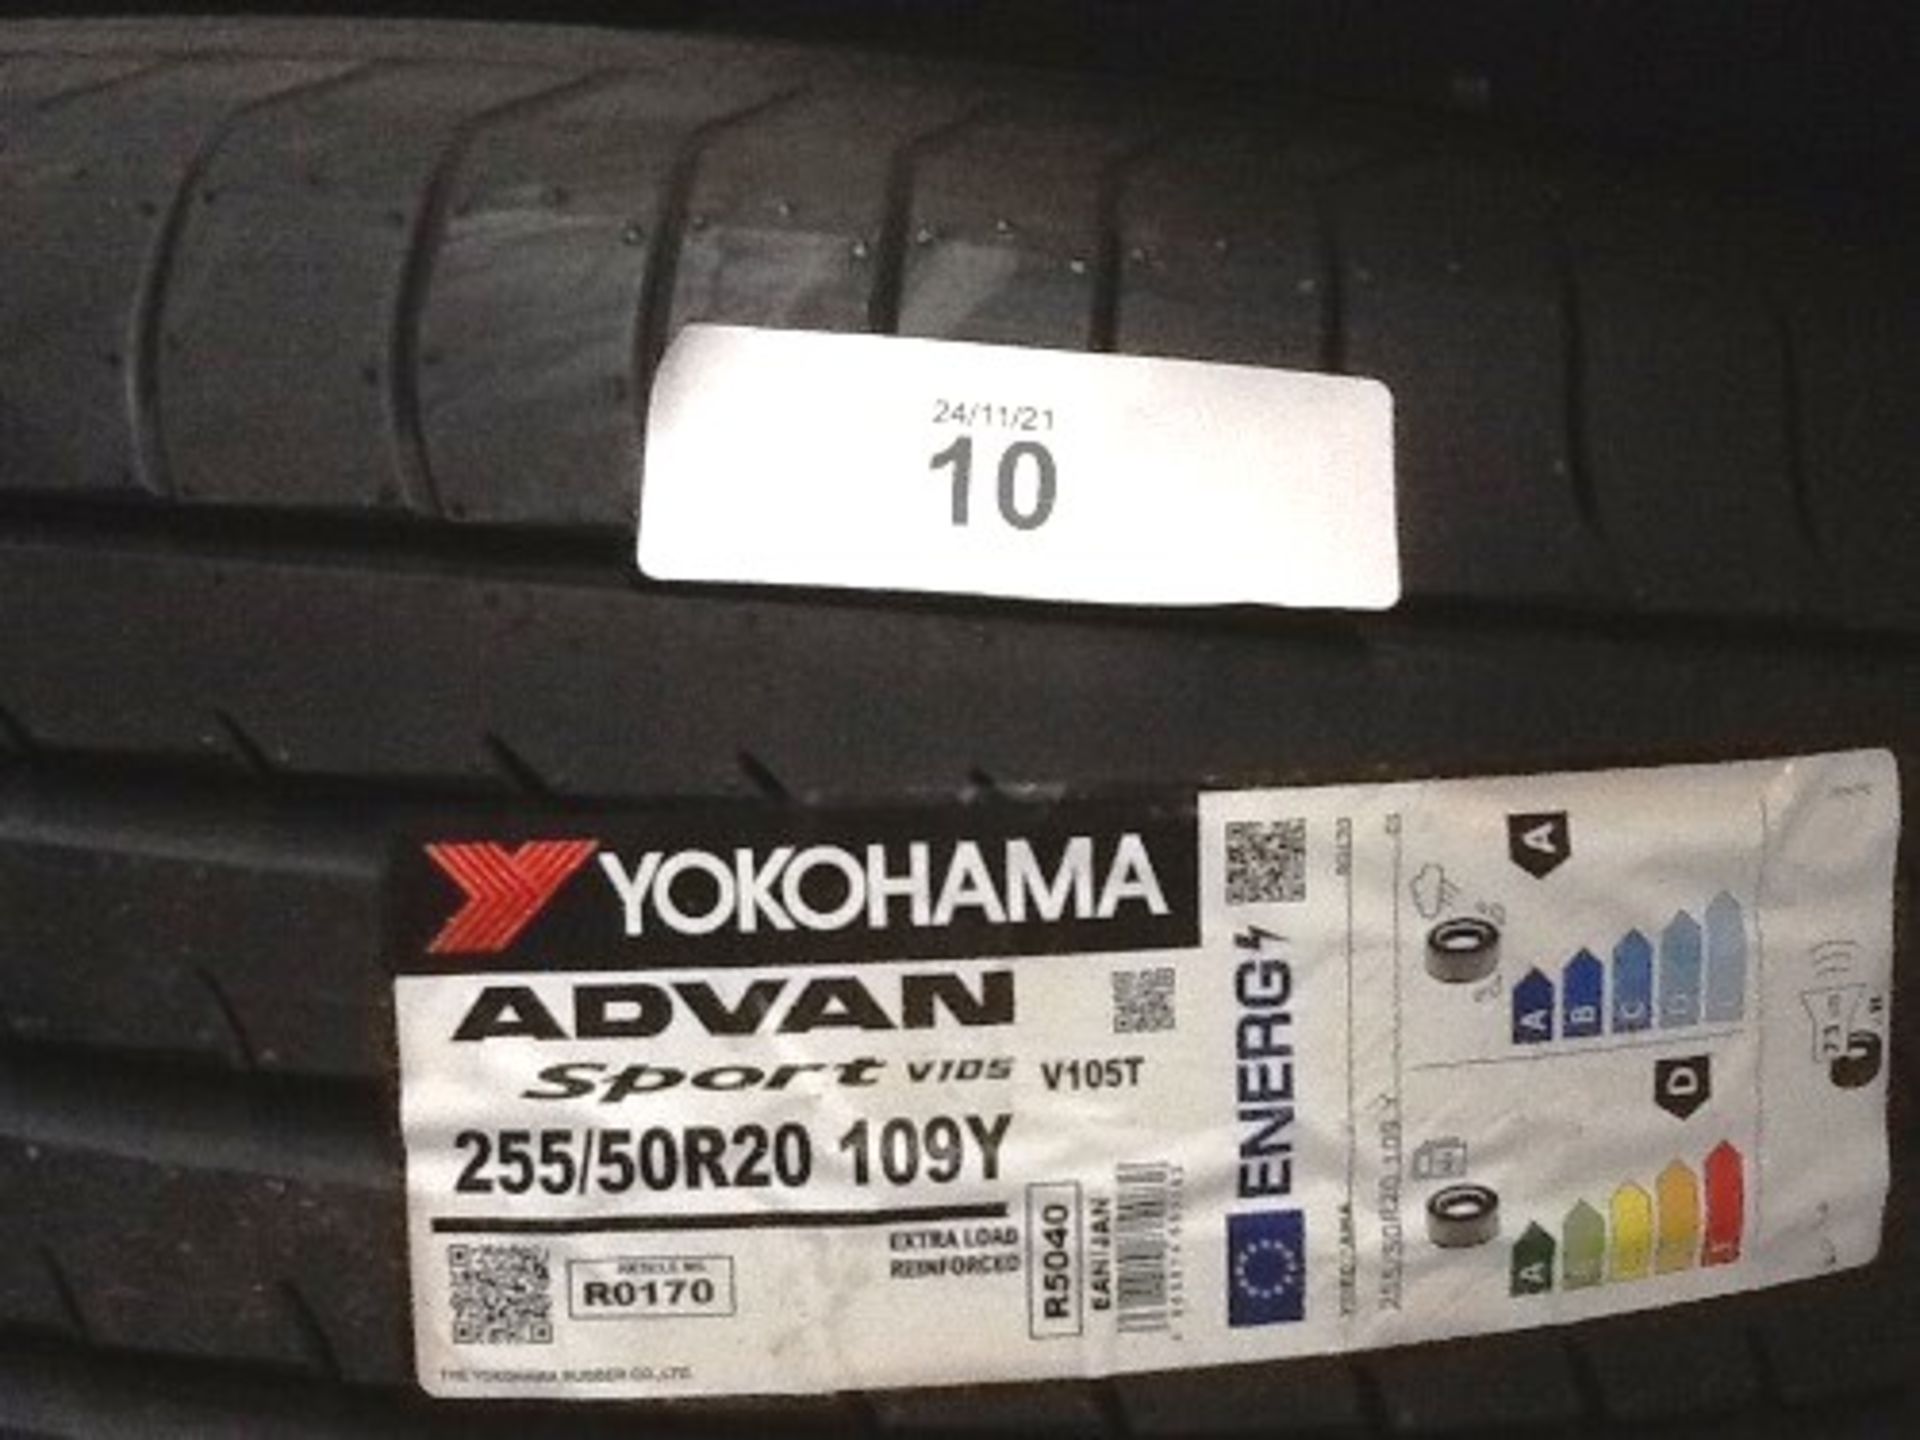 1 x Yokohama Advan Sport Extra-Load reinforced tyre, size 255/50R20 109Y V105 - New with labels (